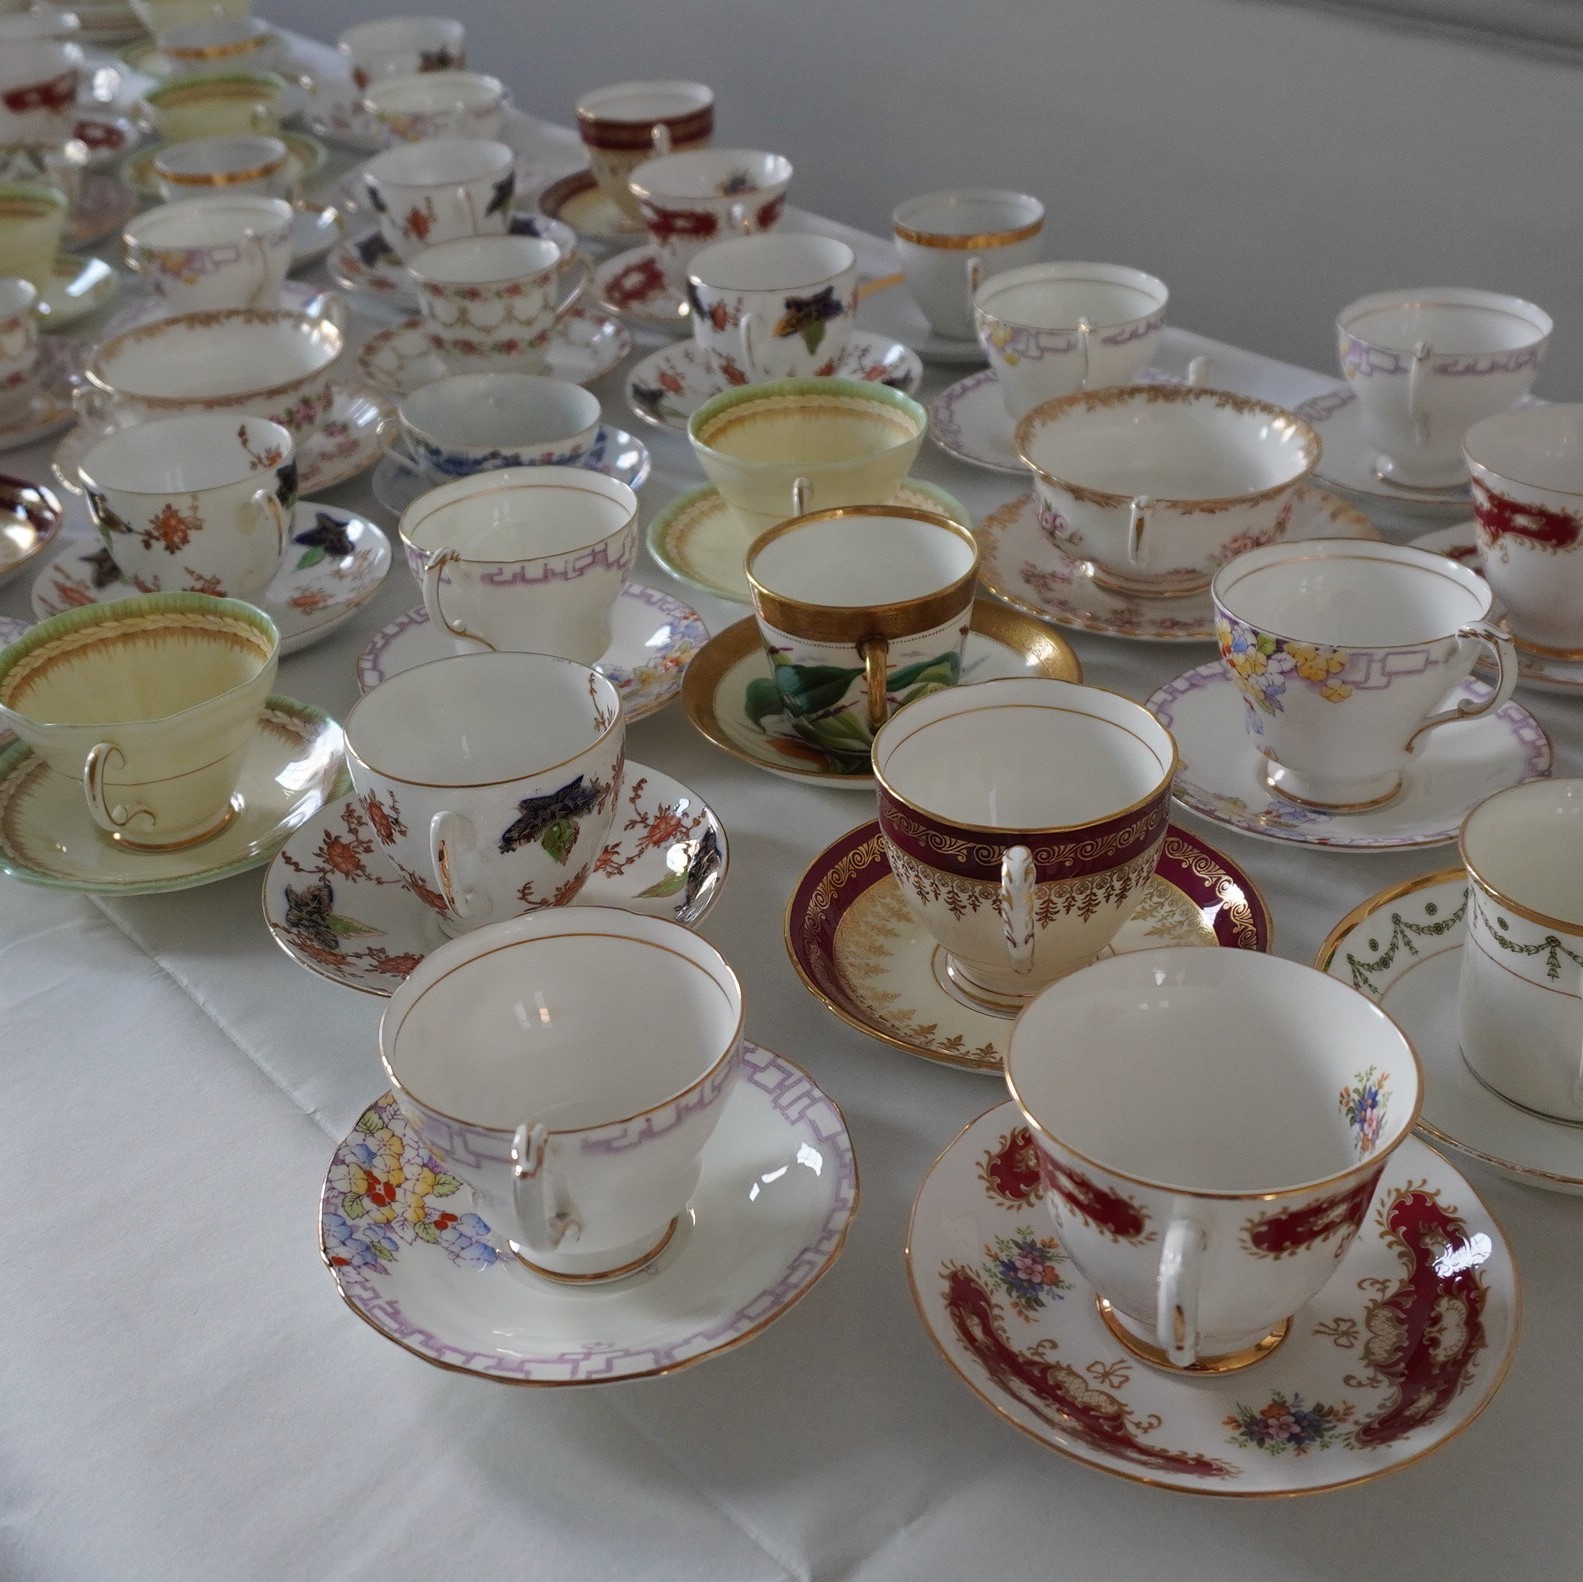 Table full of china teacups